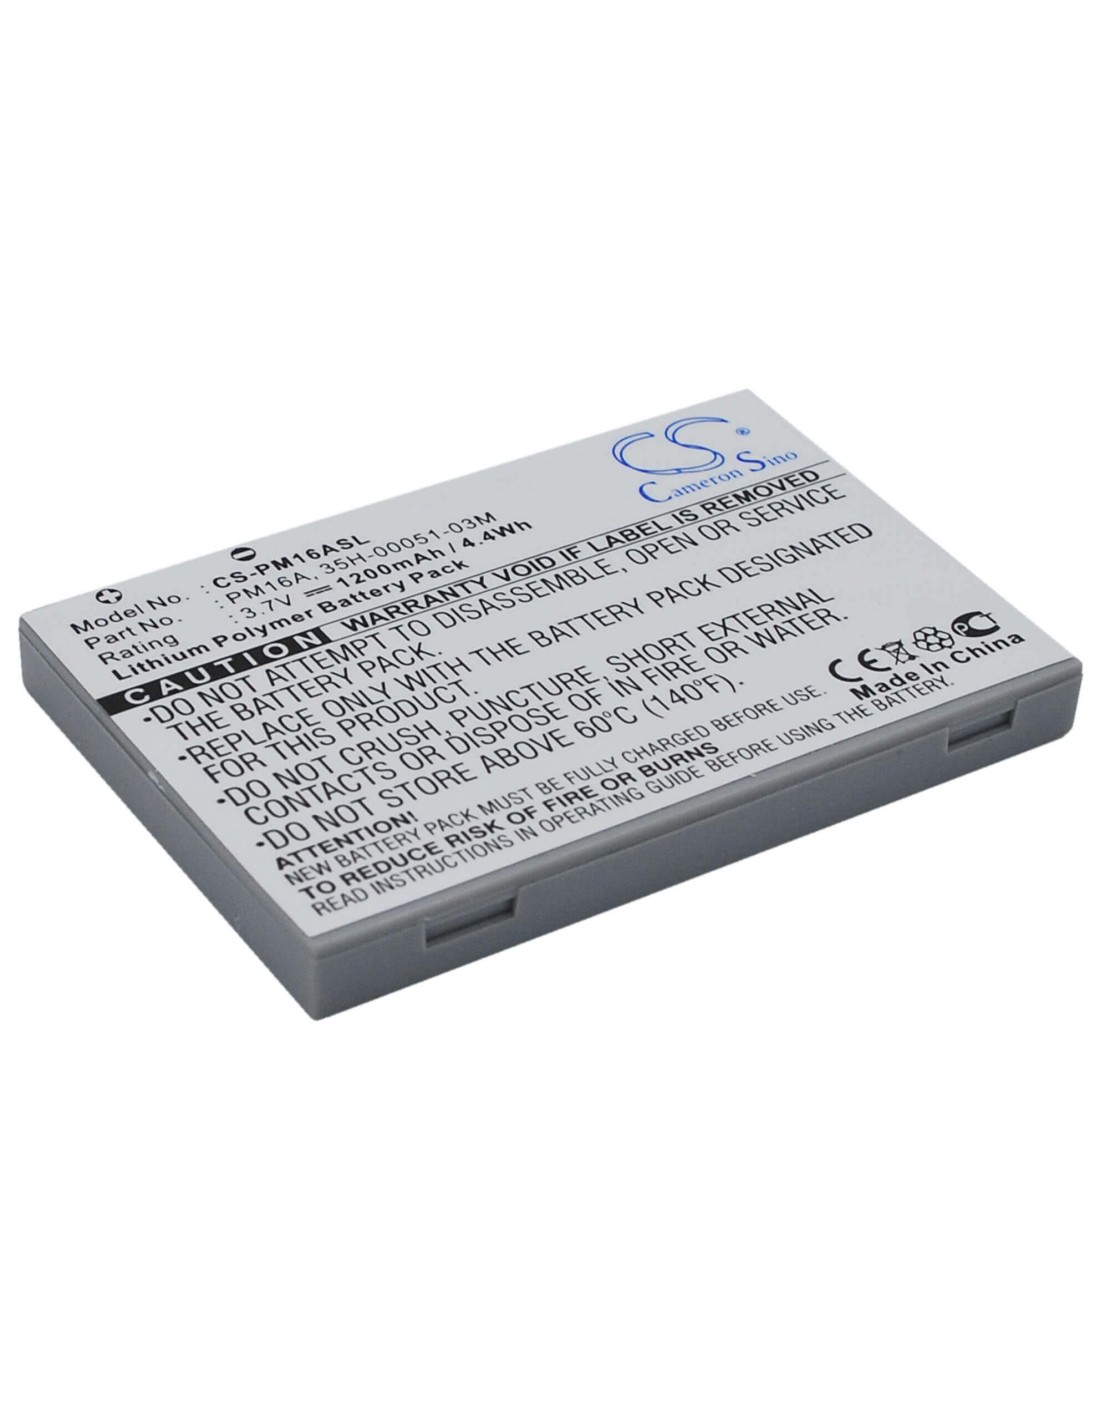 Battery for HTC Charmer, Magician, Magician Refresh 3.7V, 1200mAh - 4.44Wh